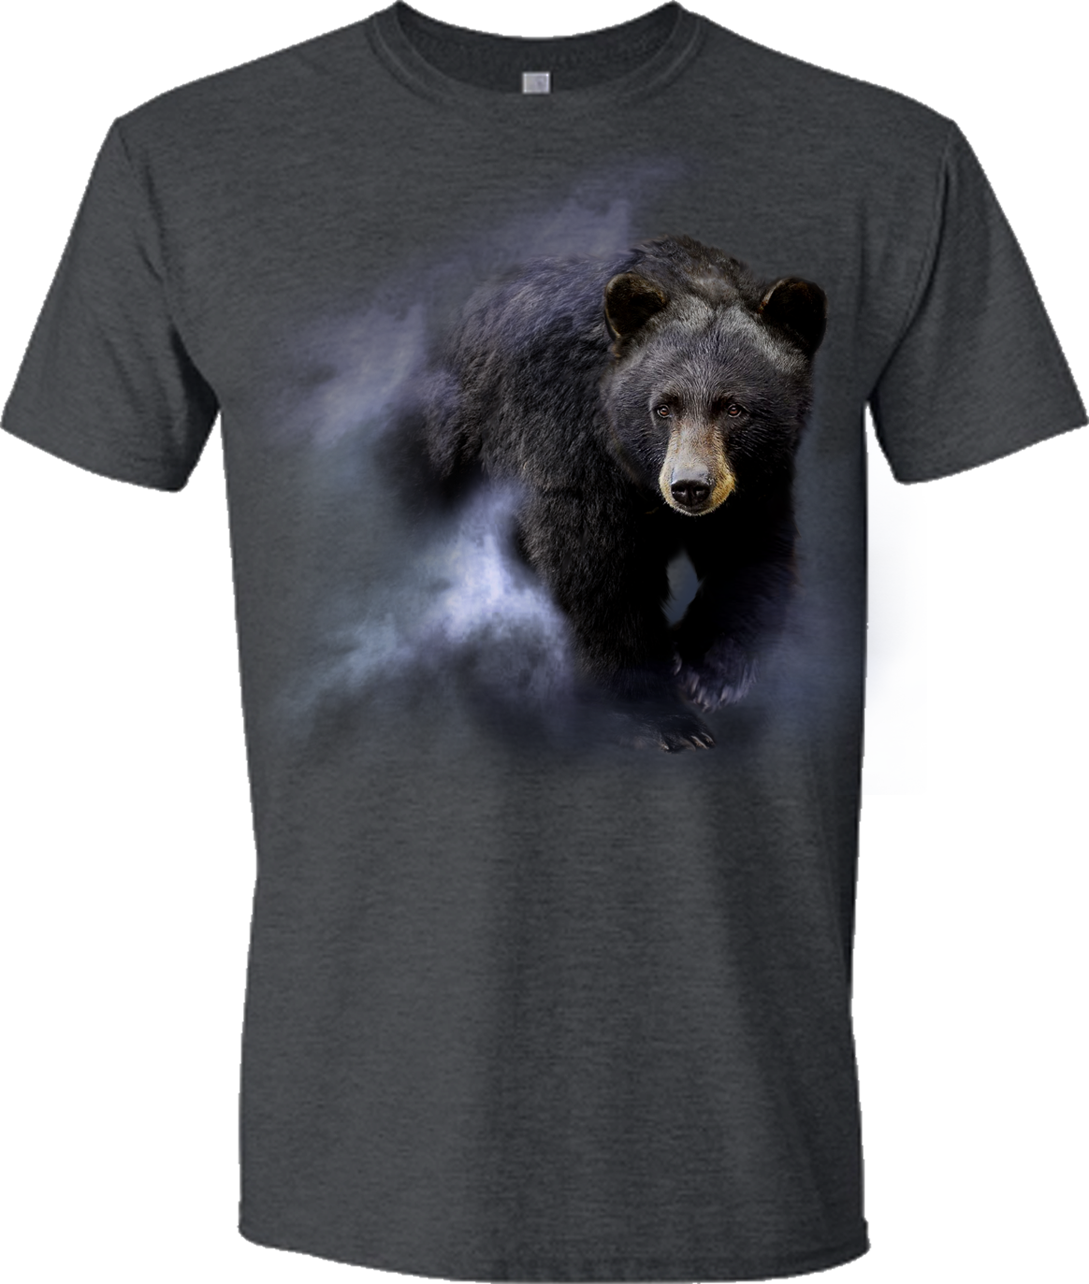 Black Bear in the Mist T-shirt- Charcoal heater t-shirt printed with black bear art by Robert Campbell